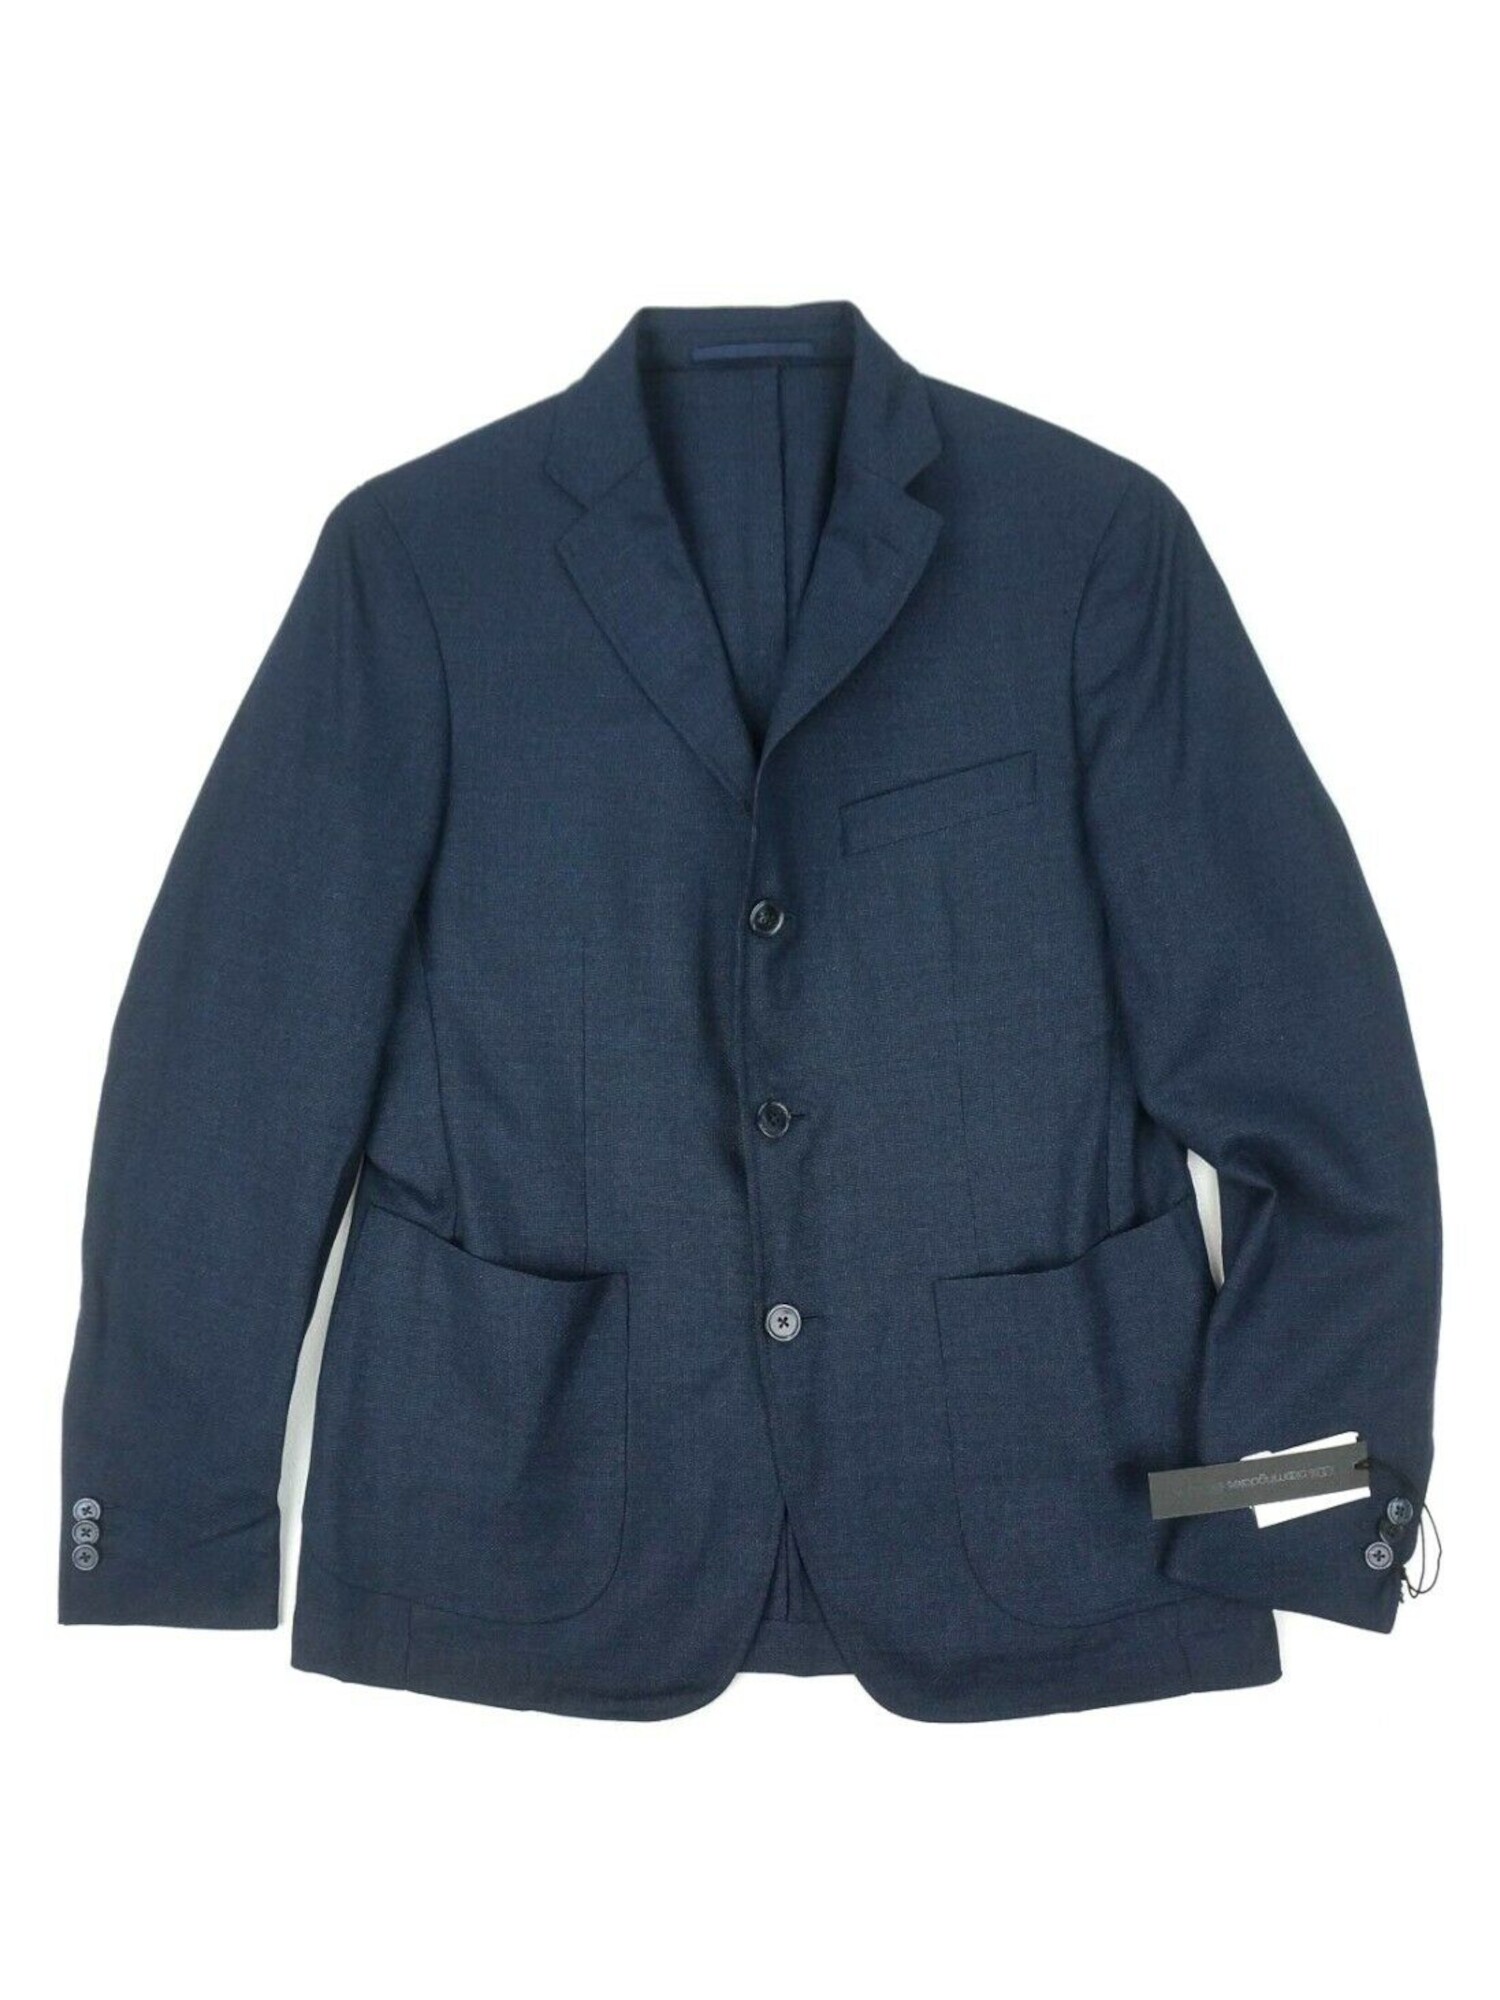 DYLAN GRAY Mens Navy Single Breasted Sport Coat 42R